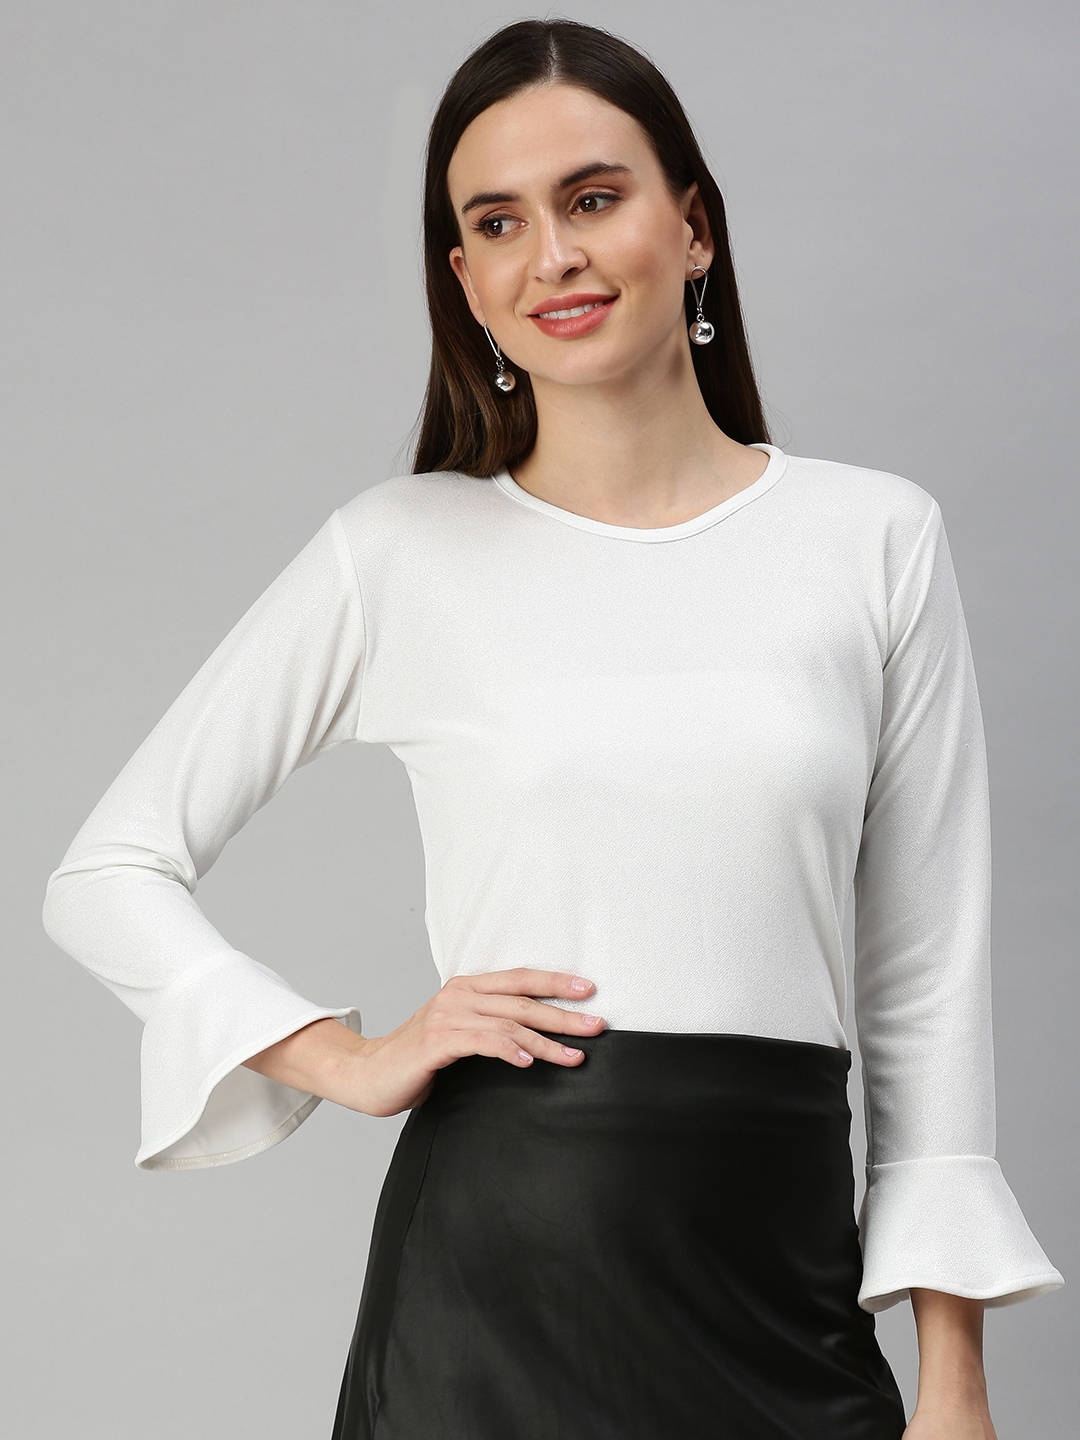 Women's White Polyester Solid Tops